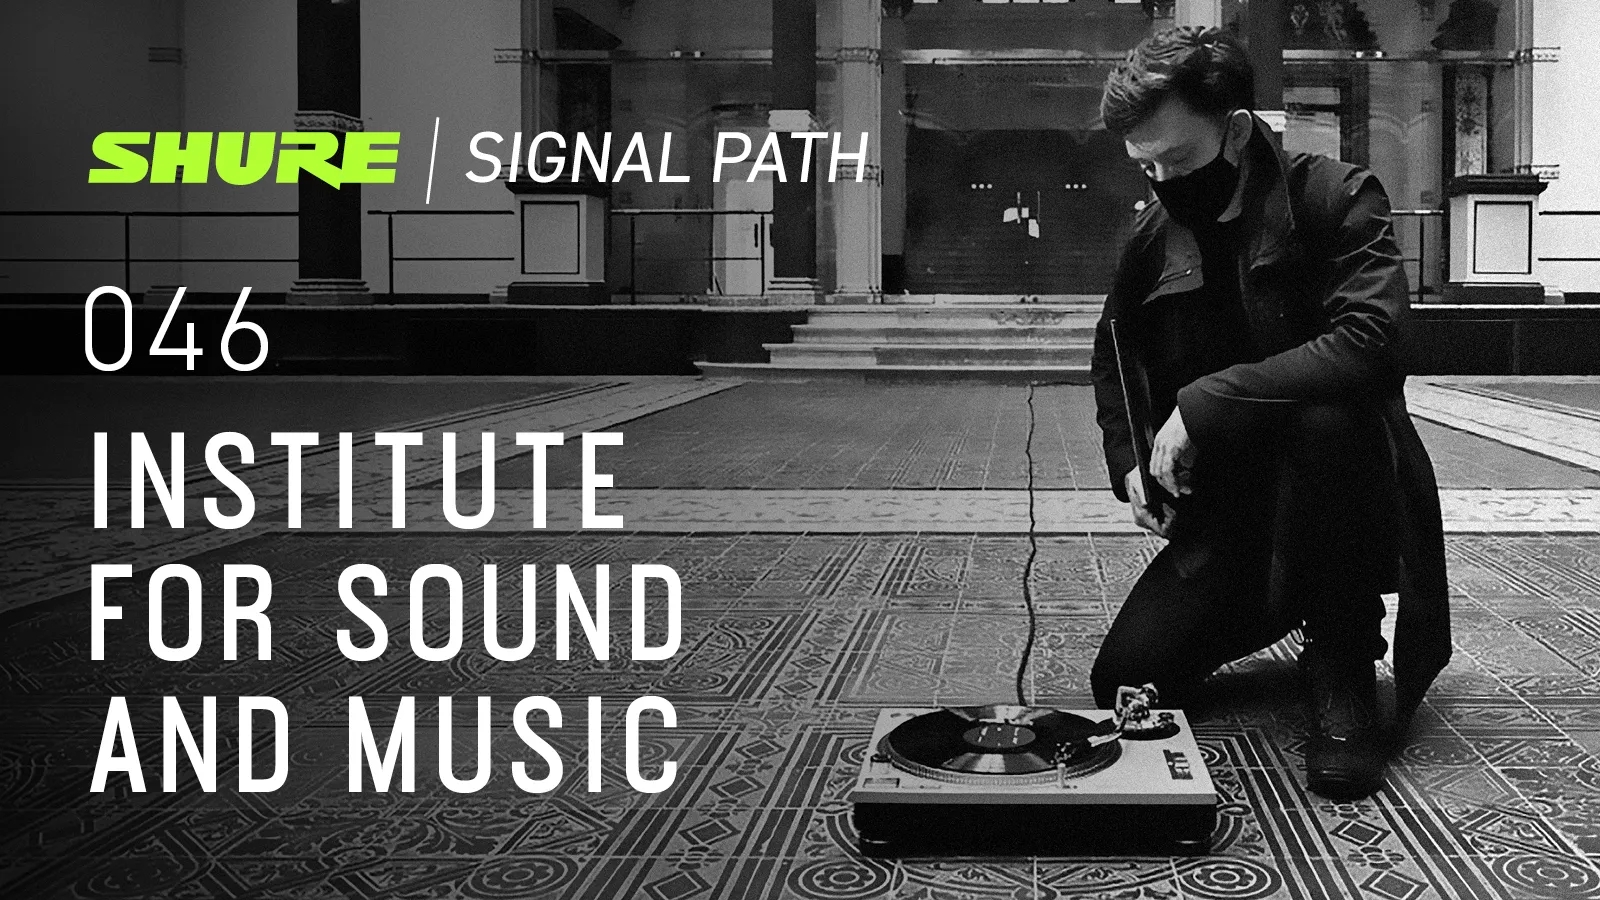 Listen to the latest SIGNAL PATH podcast with NICK MEEHAN from the INSTITUTE OF SOUND AND MUSIC, an initiative dedicated to sound, immersive art and electronic music.